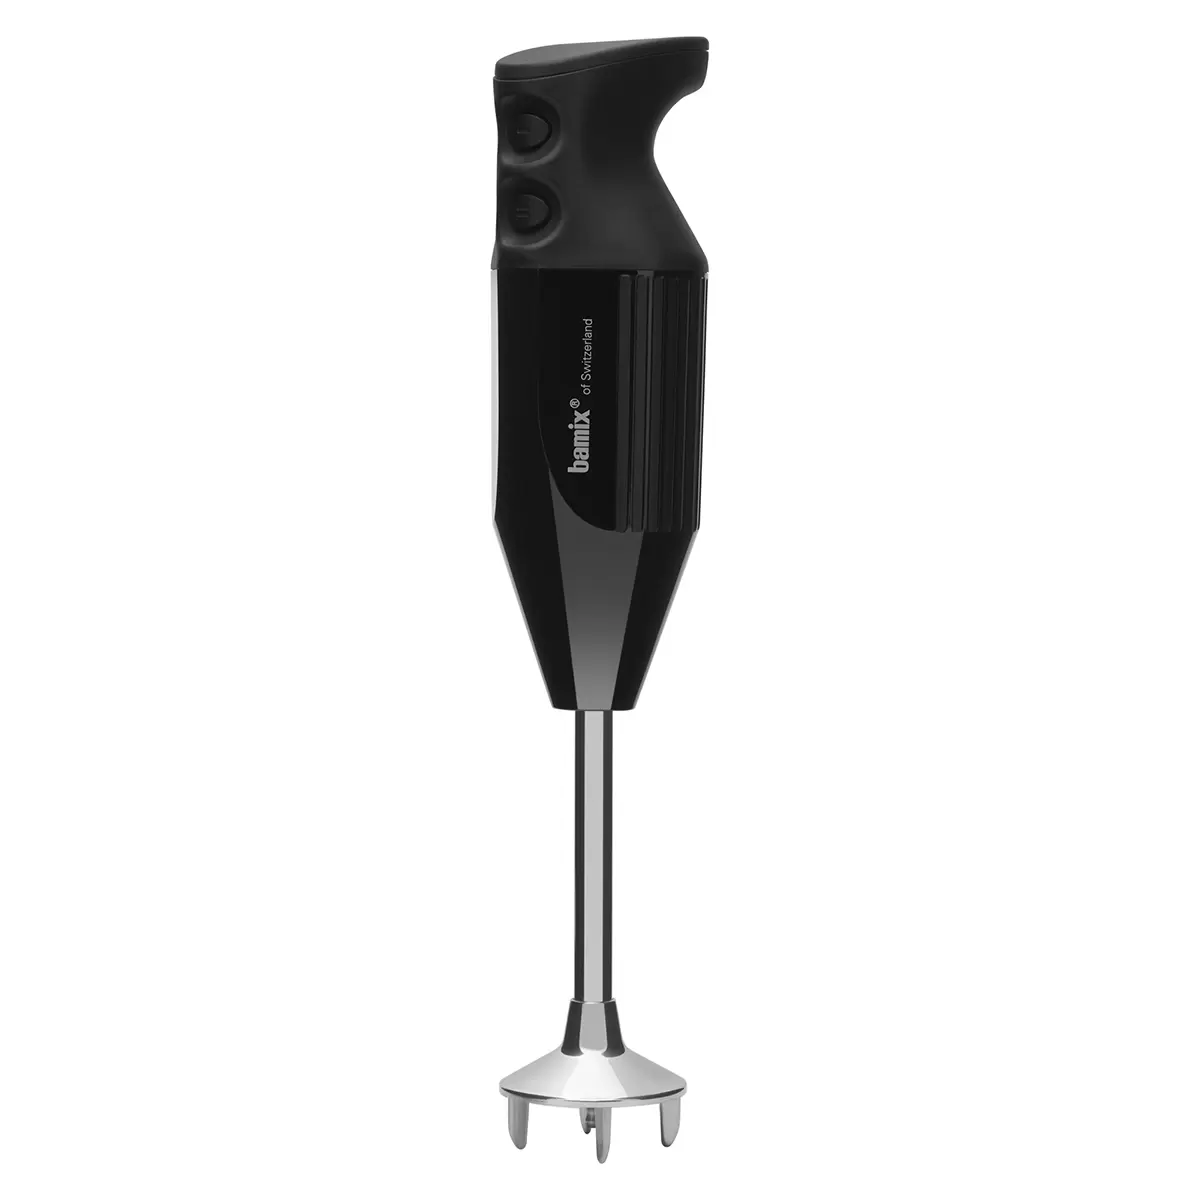 Bamix Speciality Grill & Chill BBQ 200W Immersion Blender